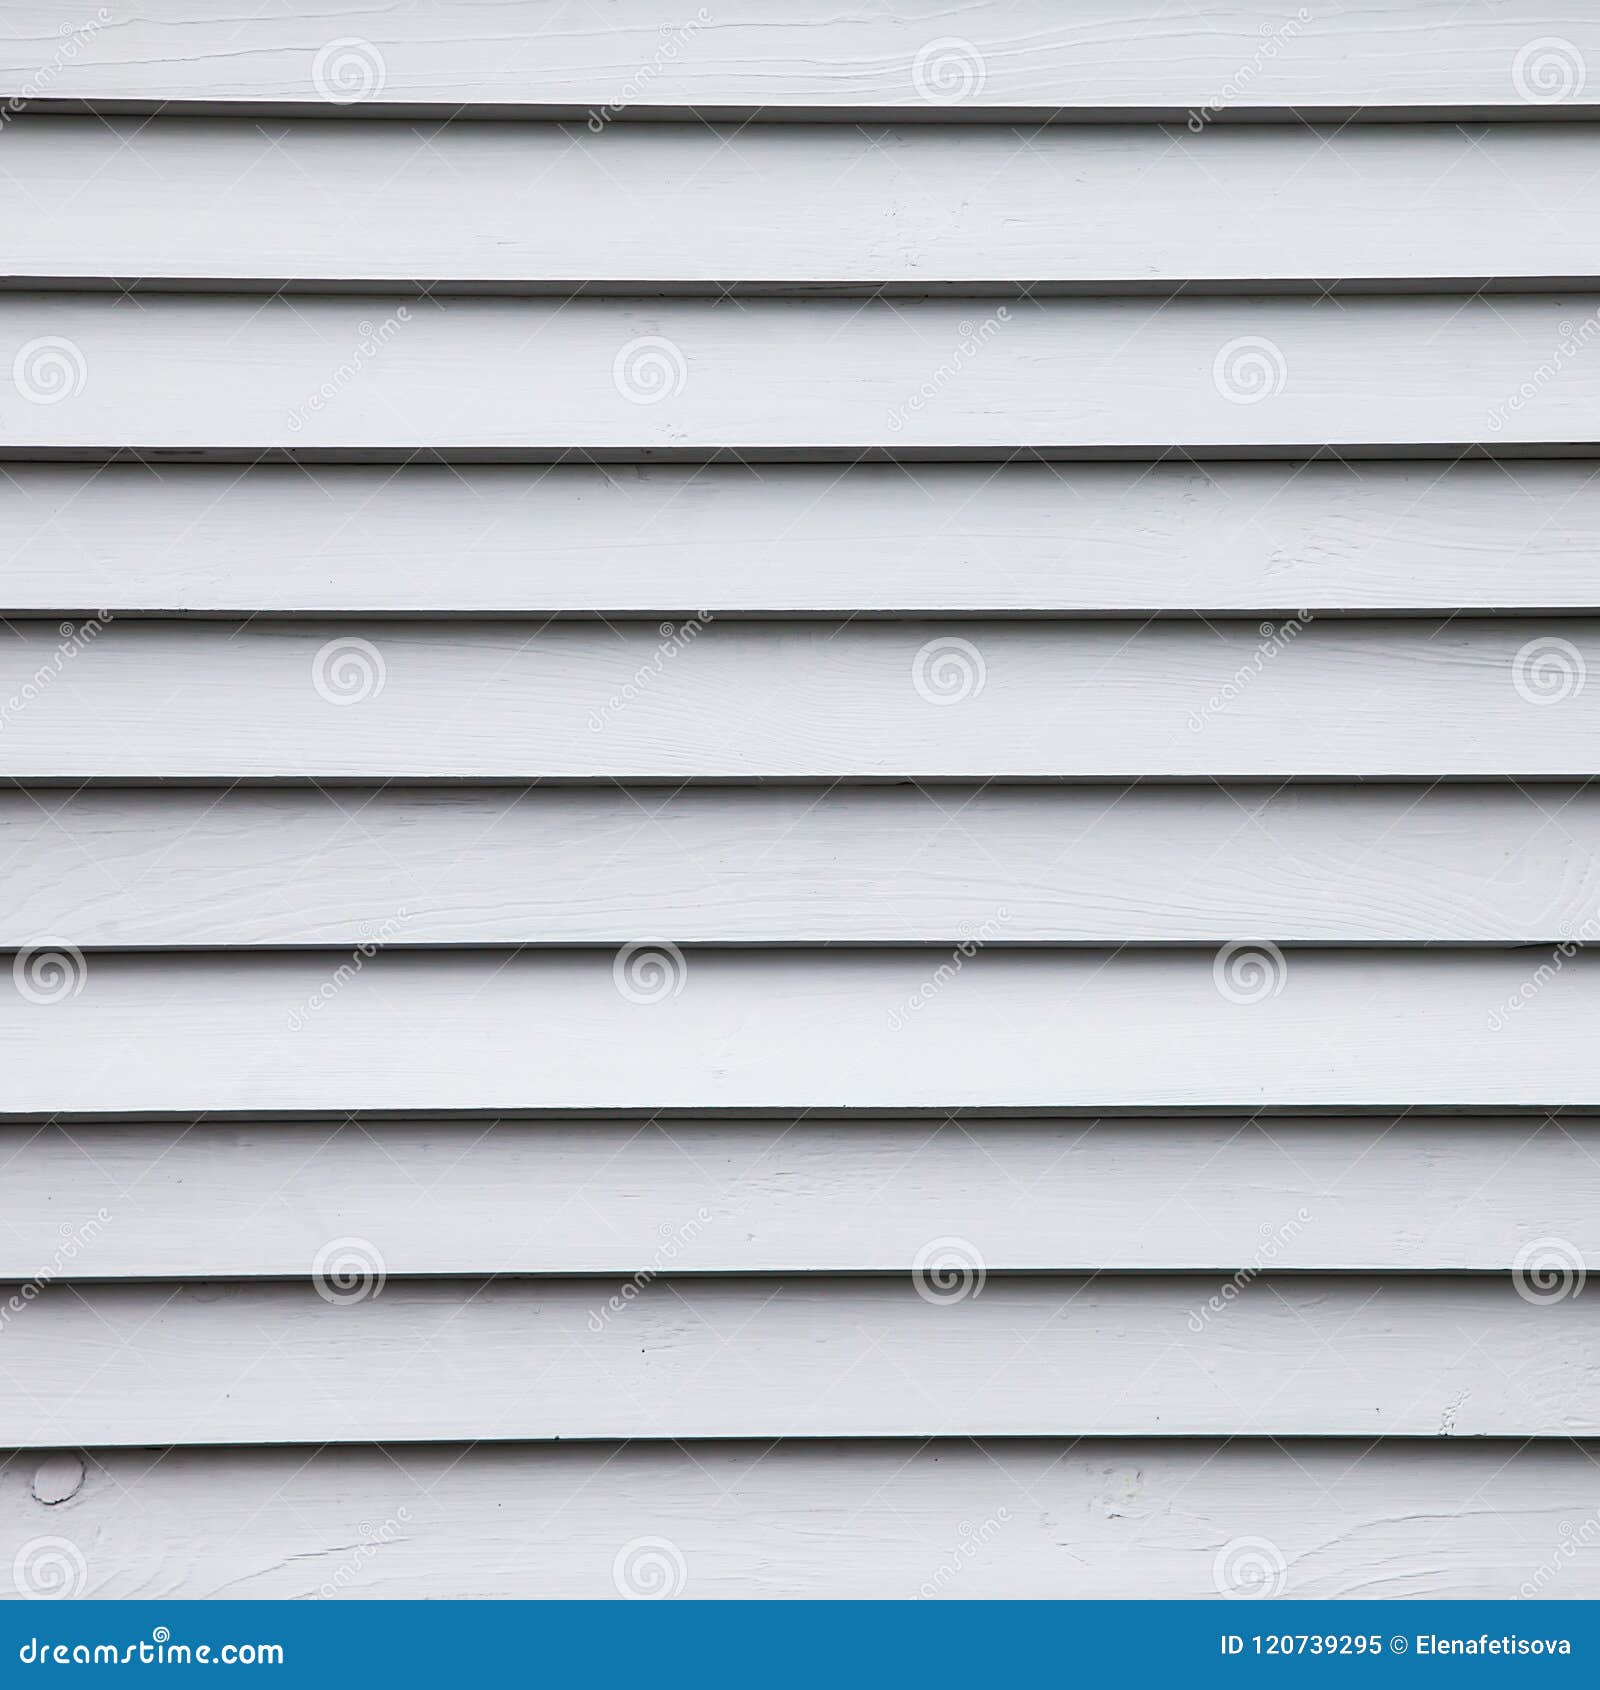 White Siding Texture In A Horizontal Arrangement Stock Image Image of copy, dwelling 120739295